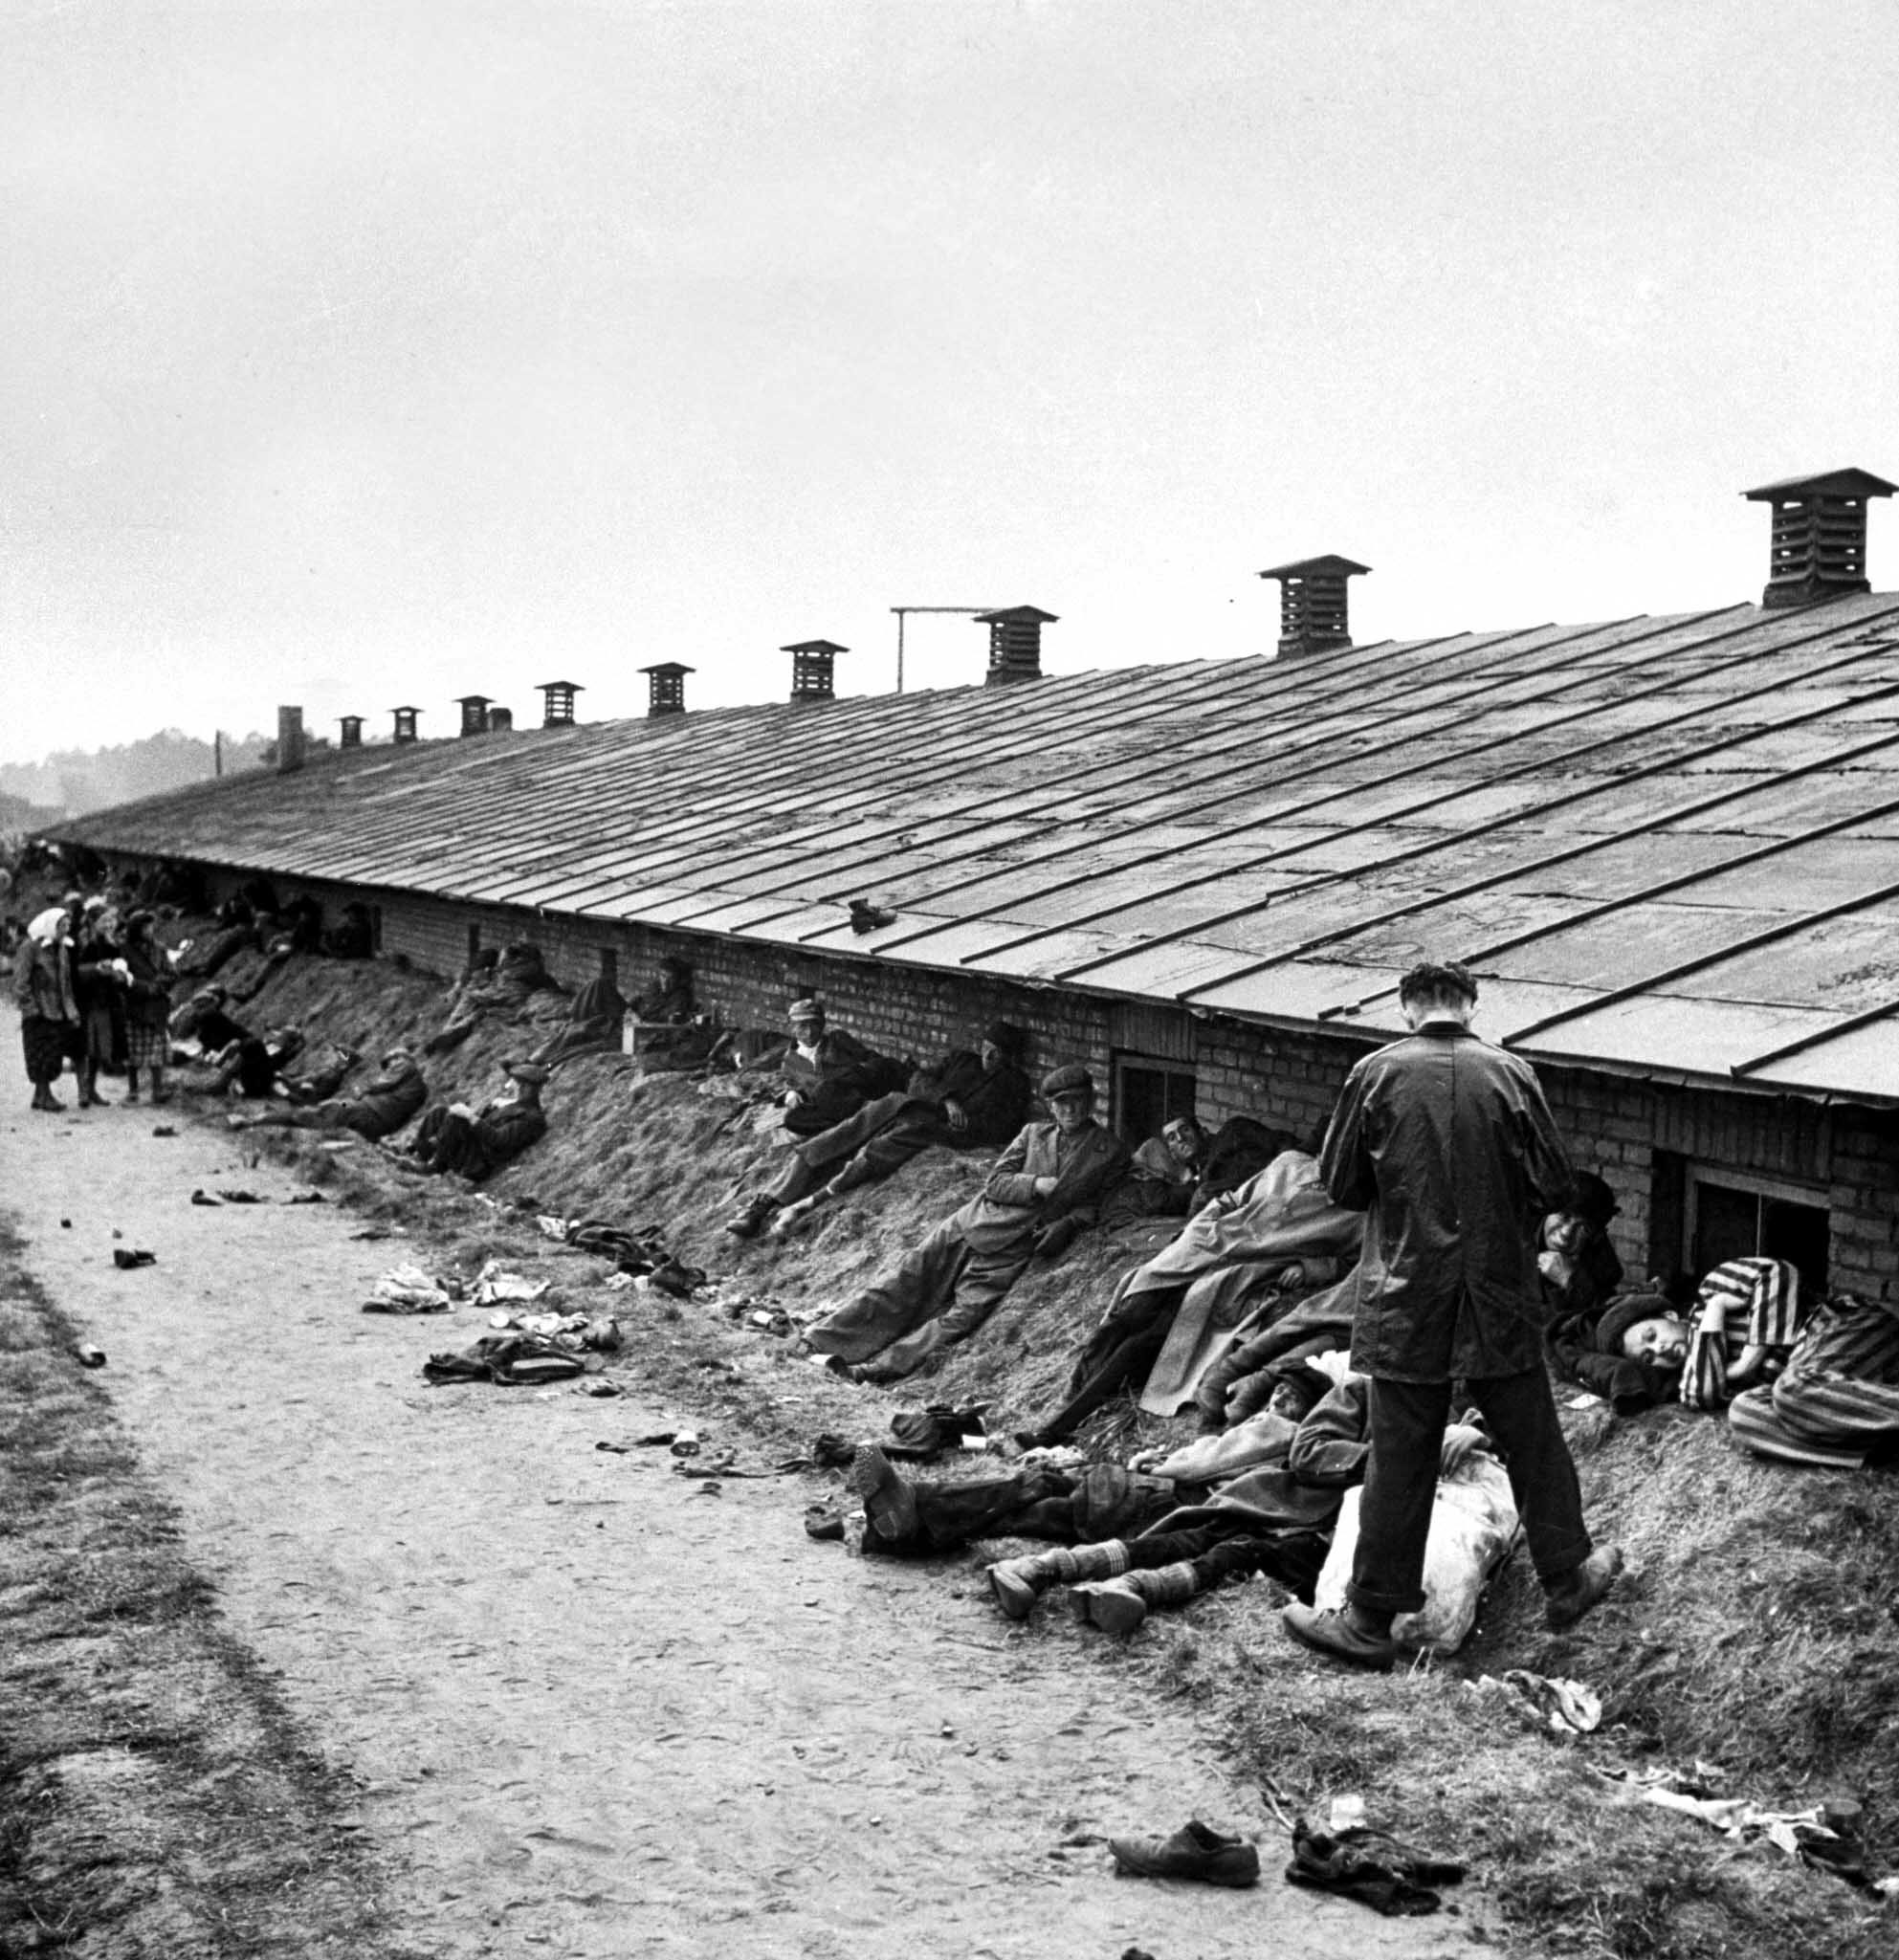 Dying men stretch out on a dirt bank behind one of the Bergen-Belsen barracks, 1945.